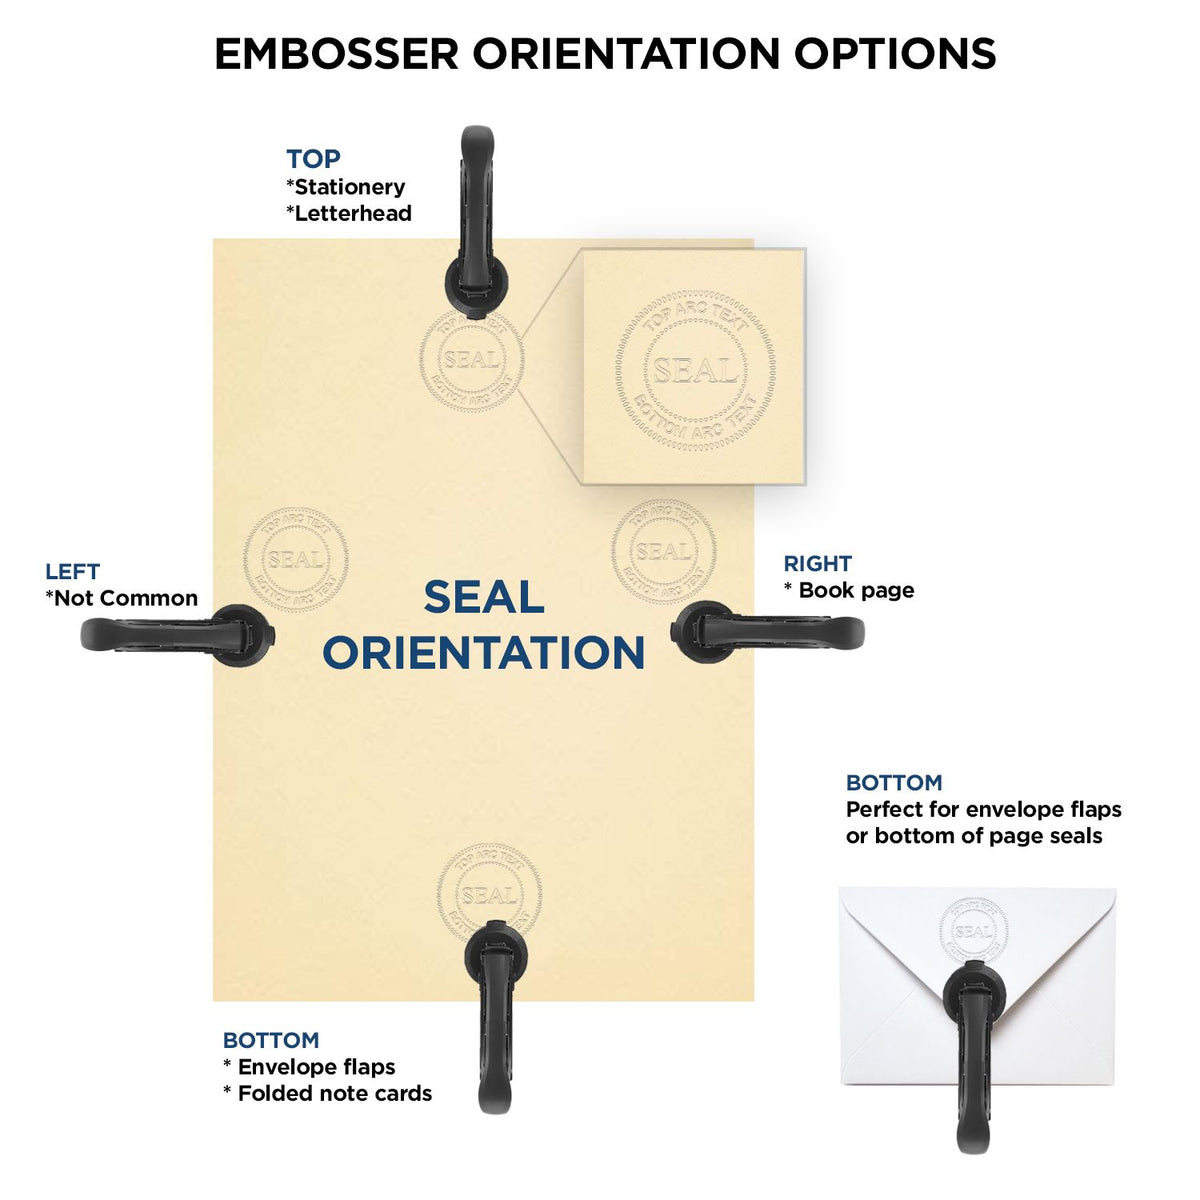 An infographic for the Heavy Duty Cast Iron Alaska Engineer Seal Embosser showing embosser orientation, this is showing examples of a top, bottom, right and left insert.